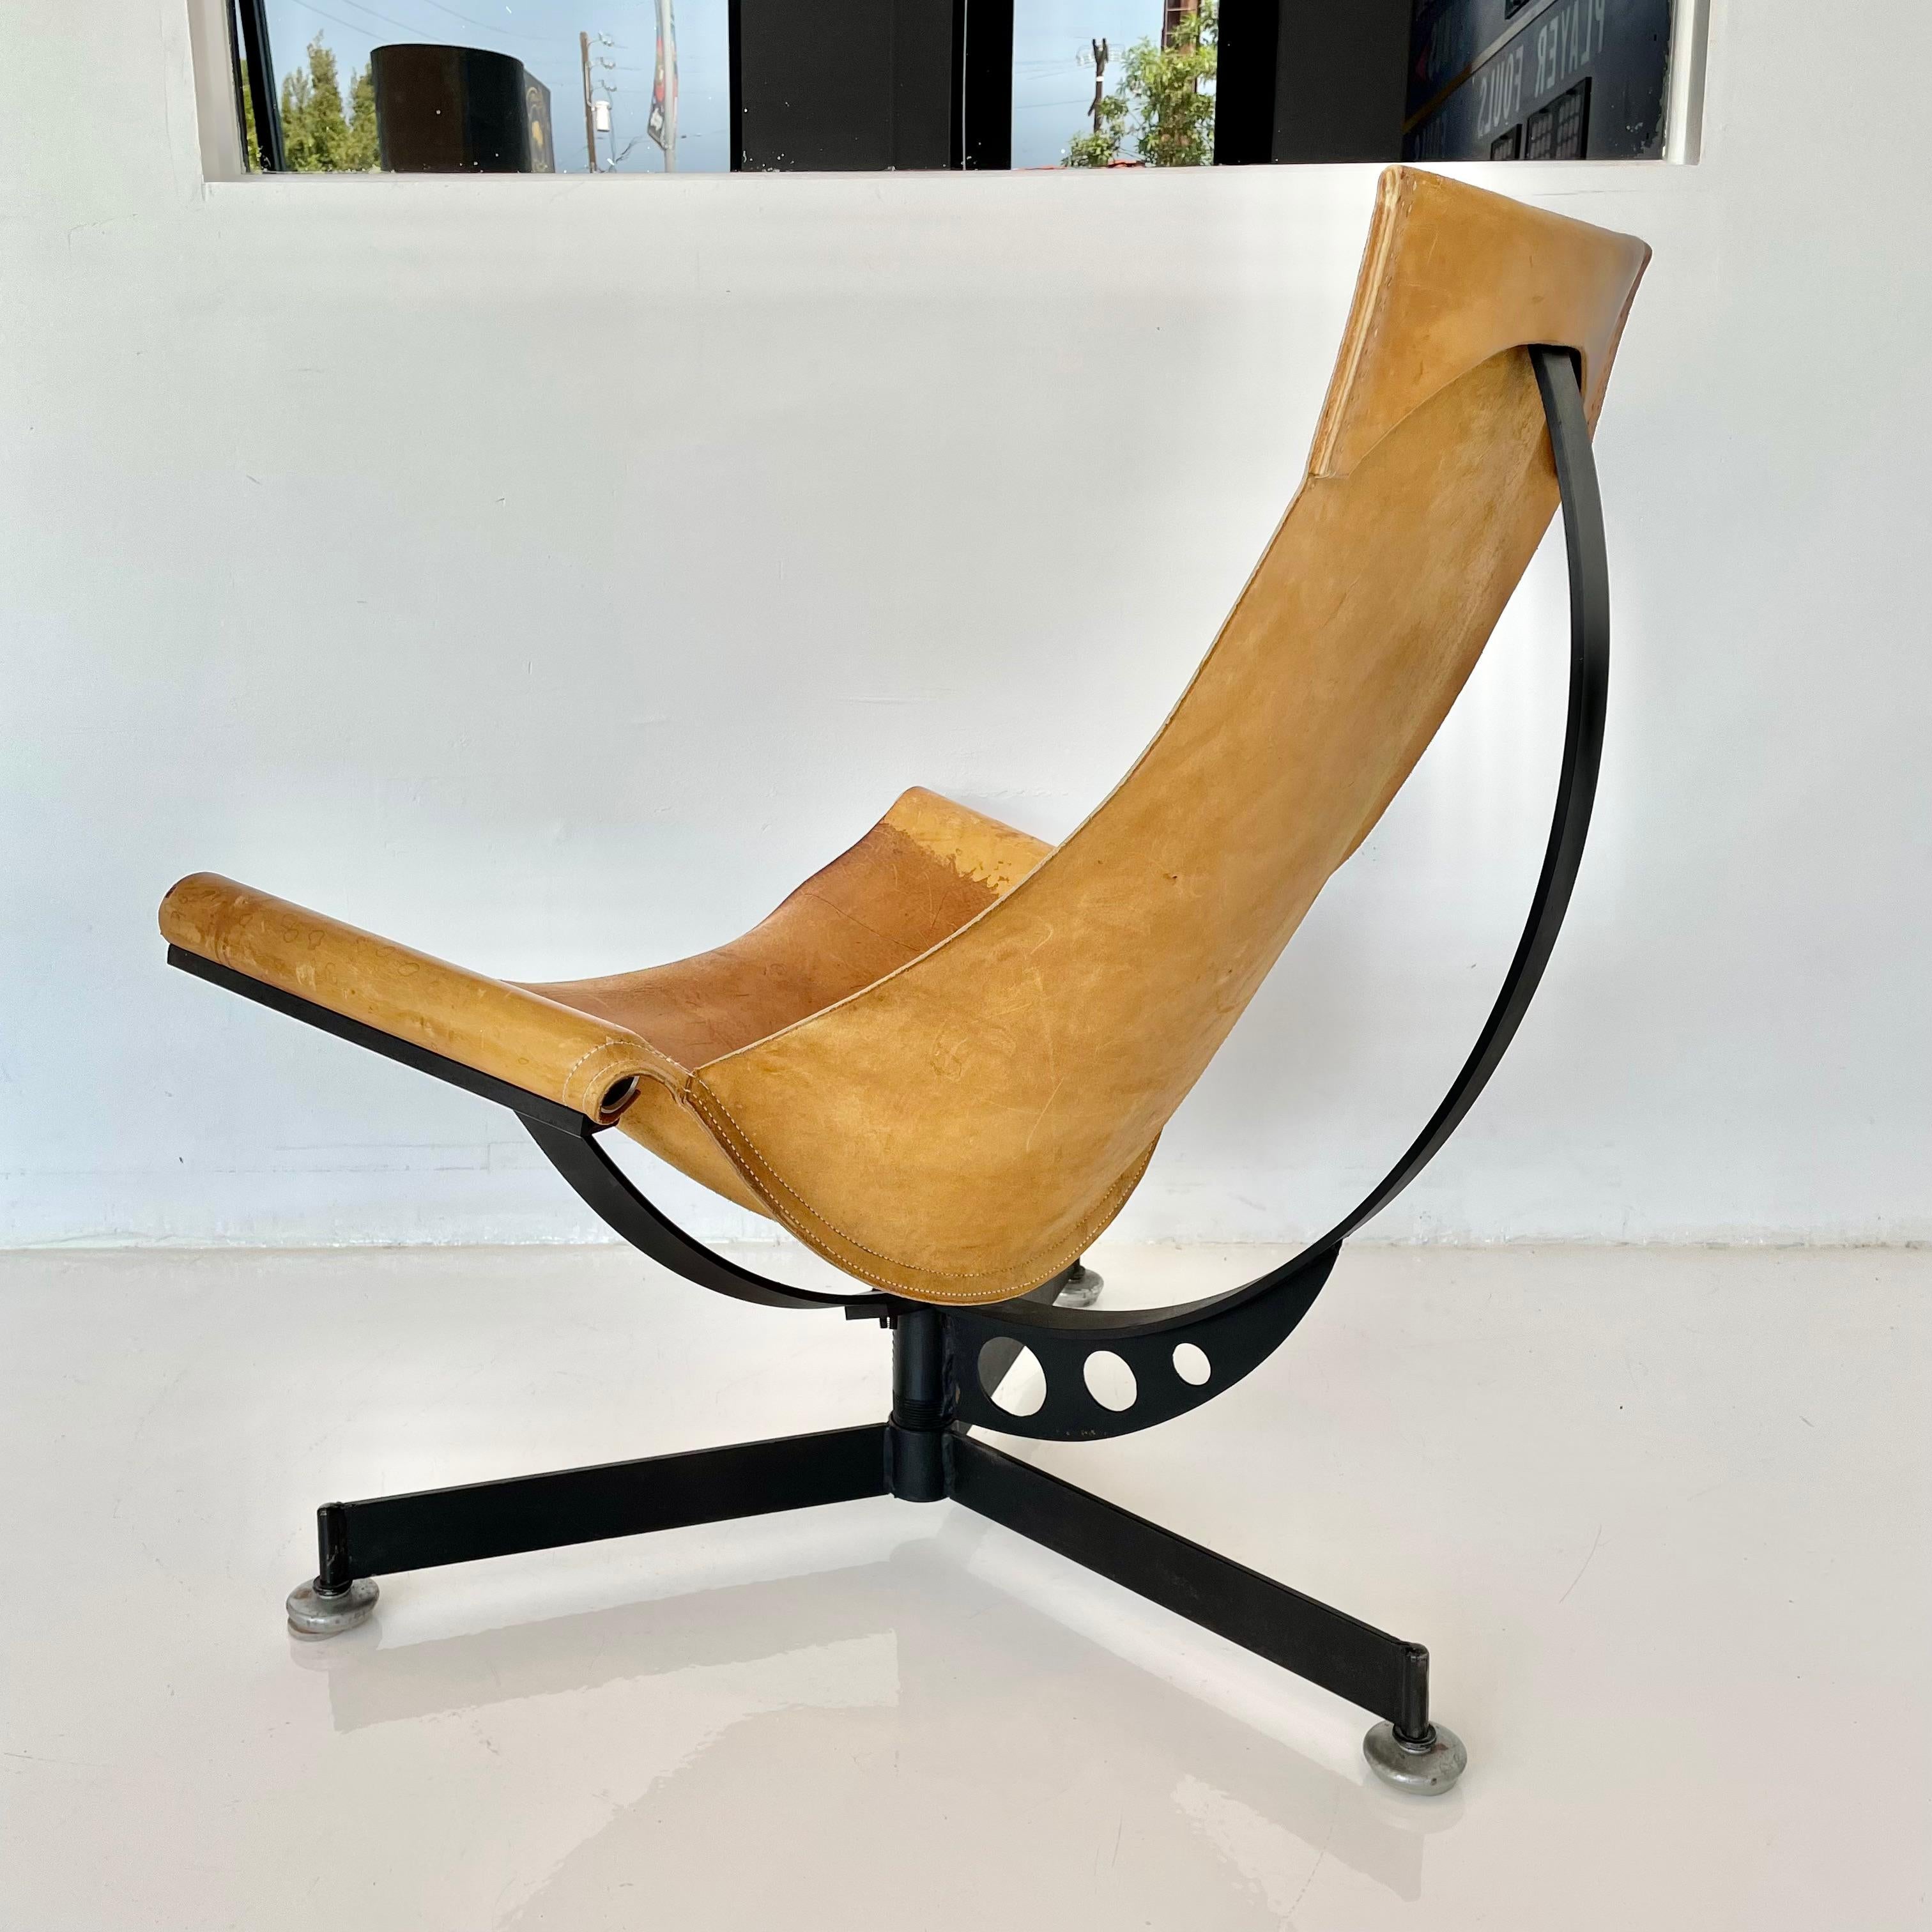 Max Gottschalk Leather and Iron Sling Chair, 1960s For Sale 3